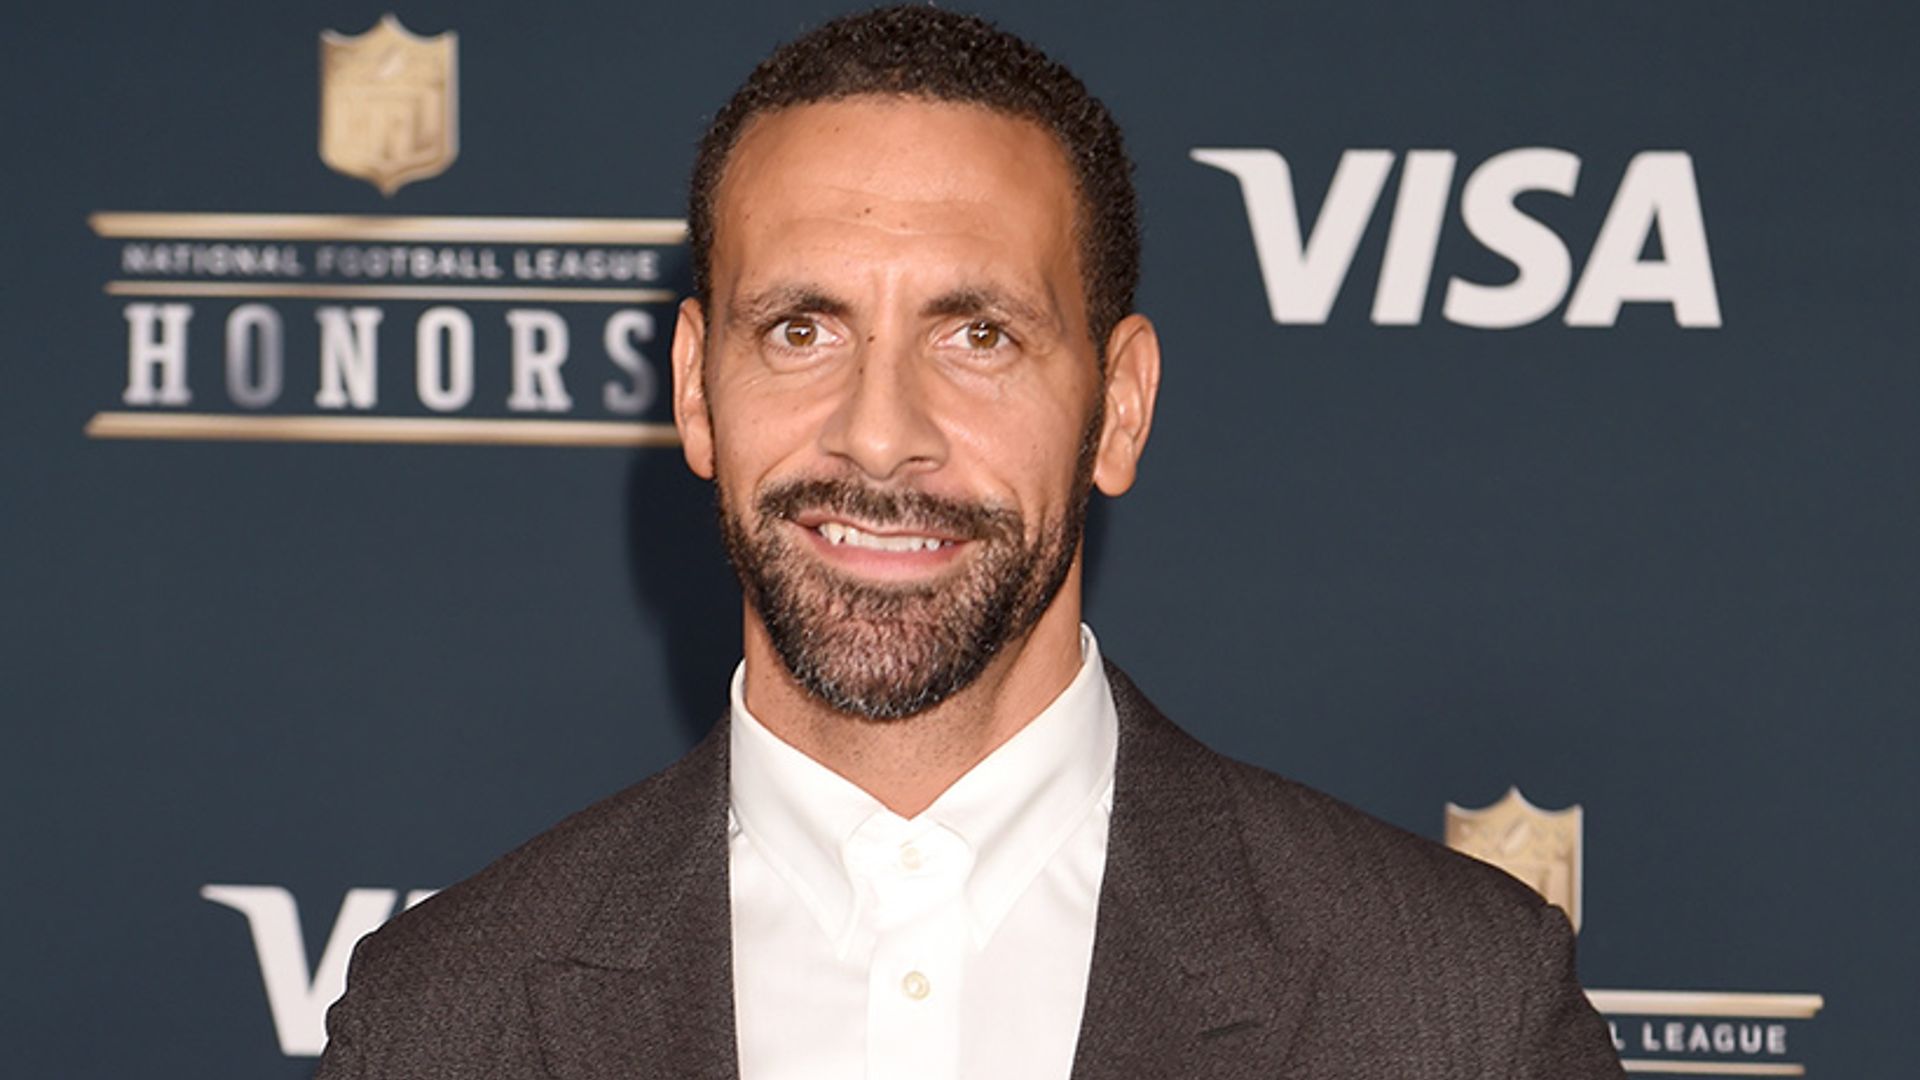 Rio Ferdinand shares first photo with girlfriend Kate Wright on family holiday